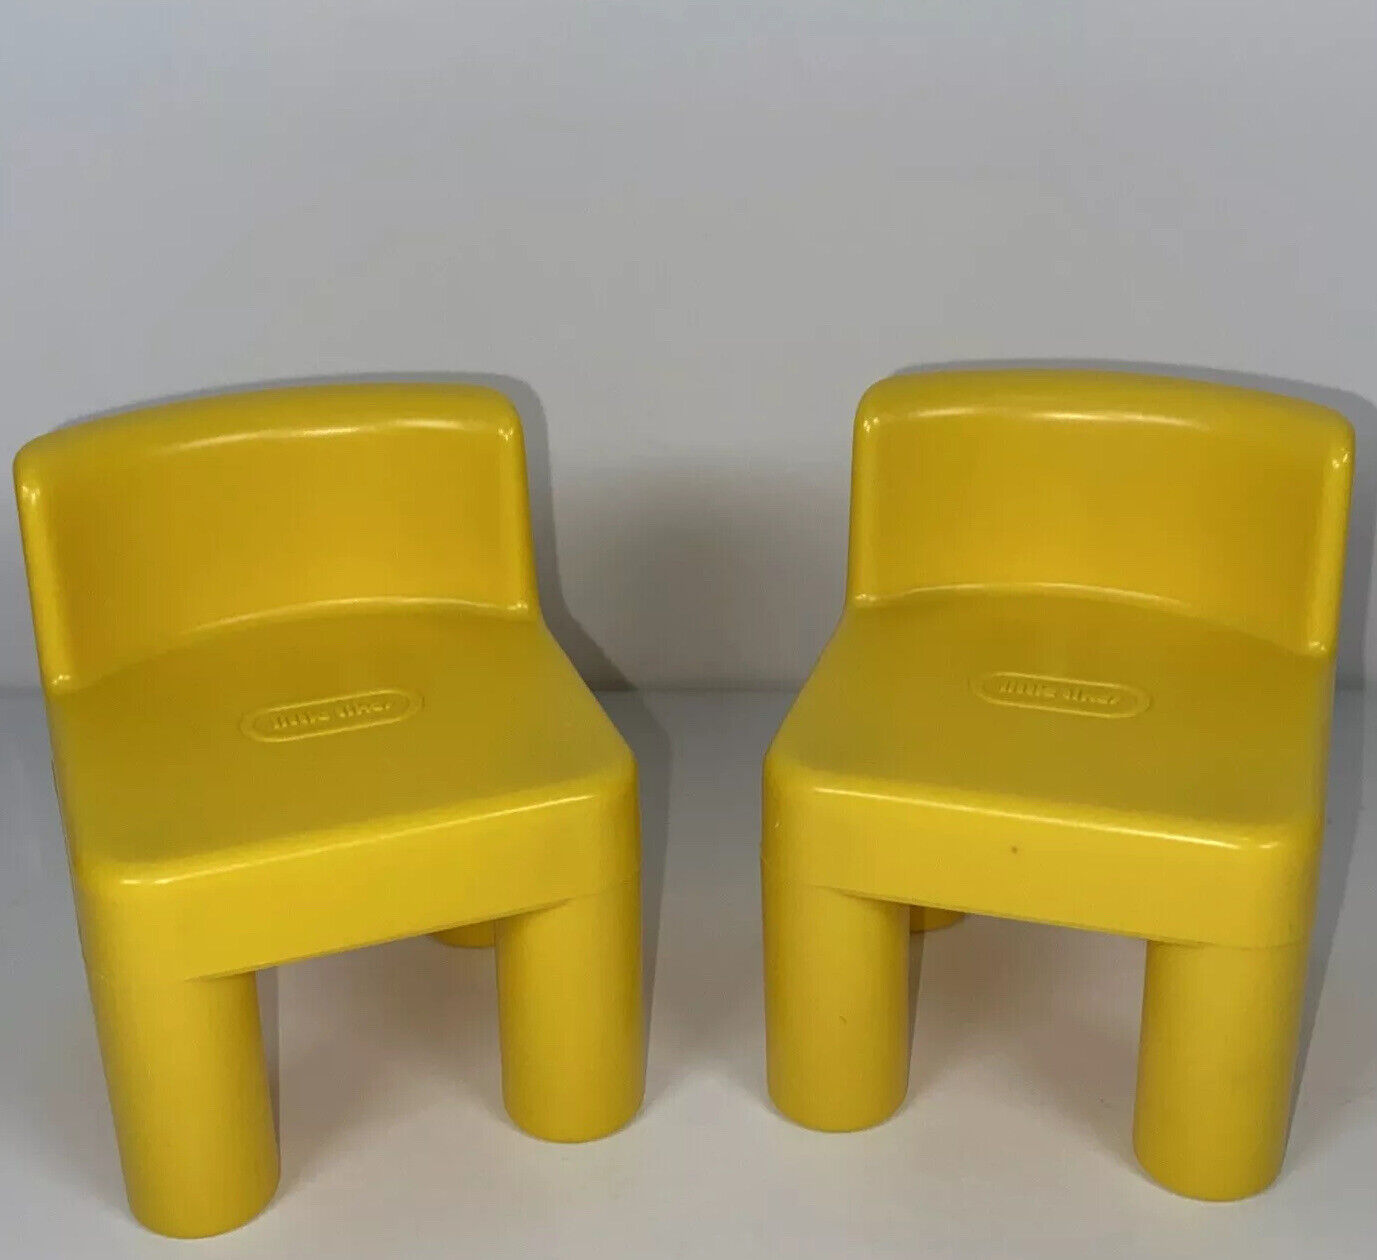 Vintage LITTLE TIKES Dollhouse online shopping Mini FURNITURE YELLO Two 2 Many popular brands Of Set